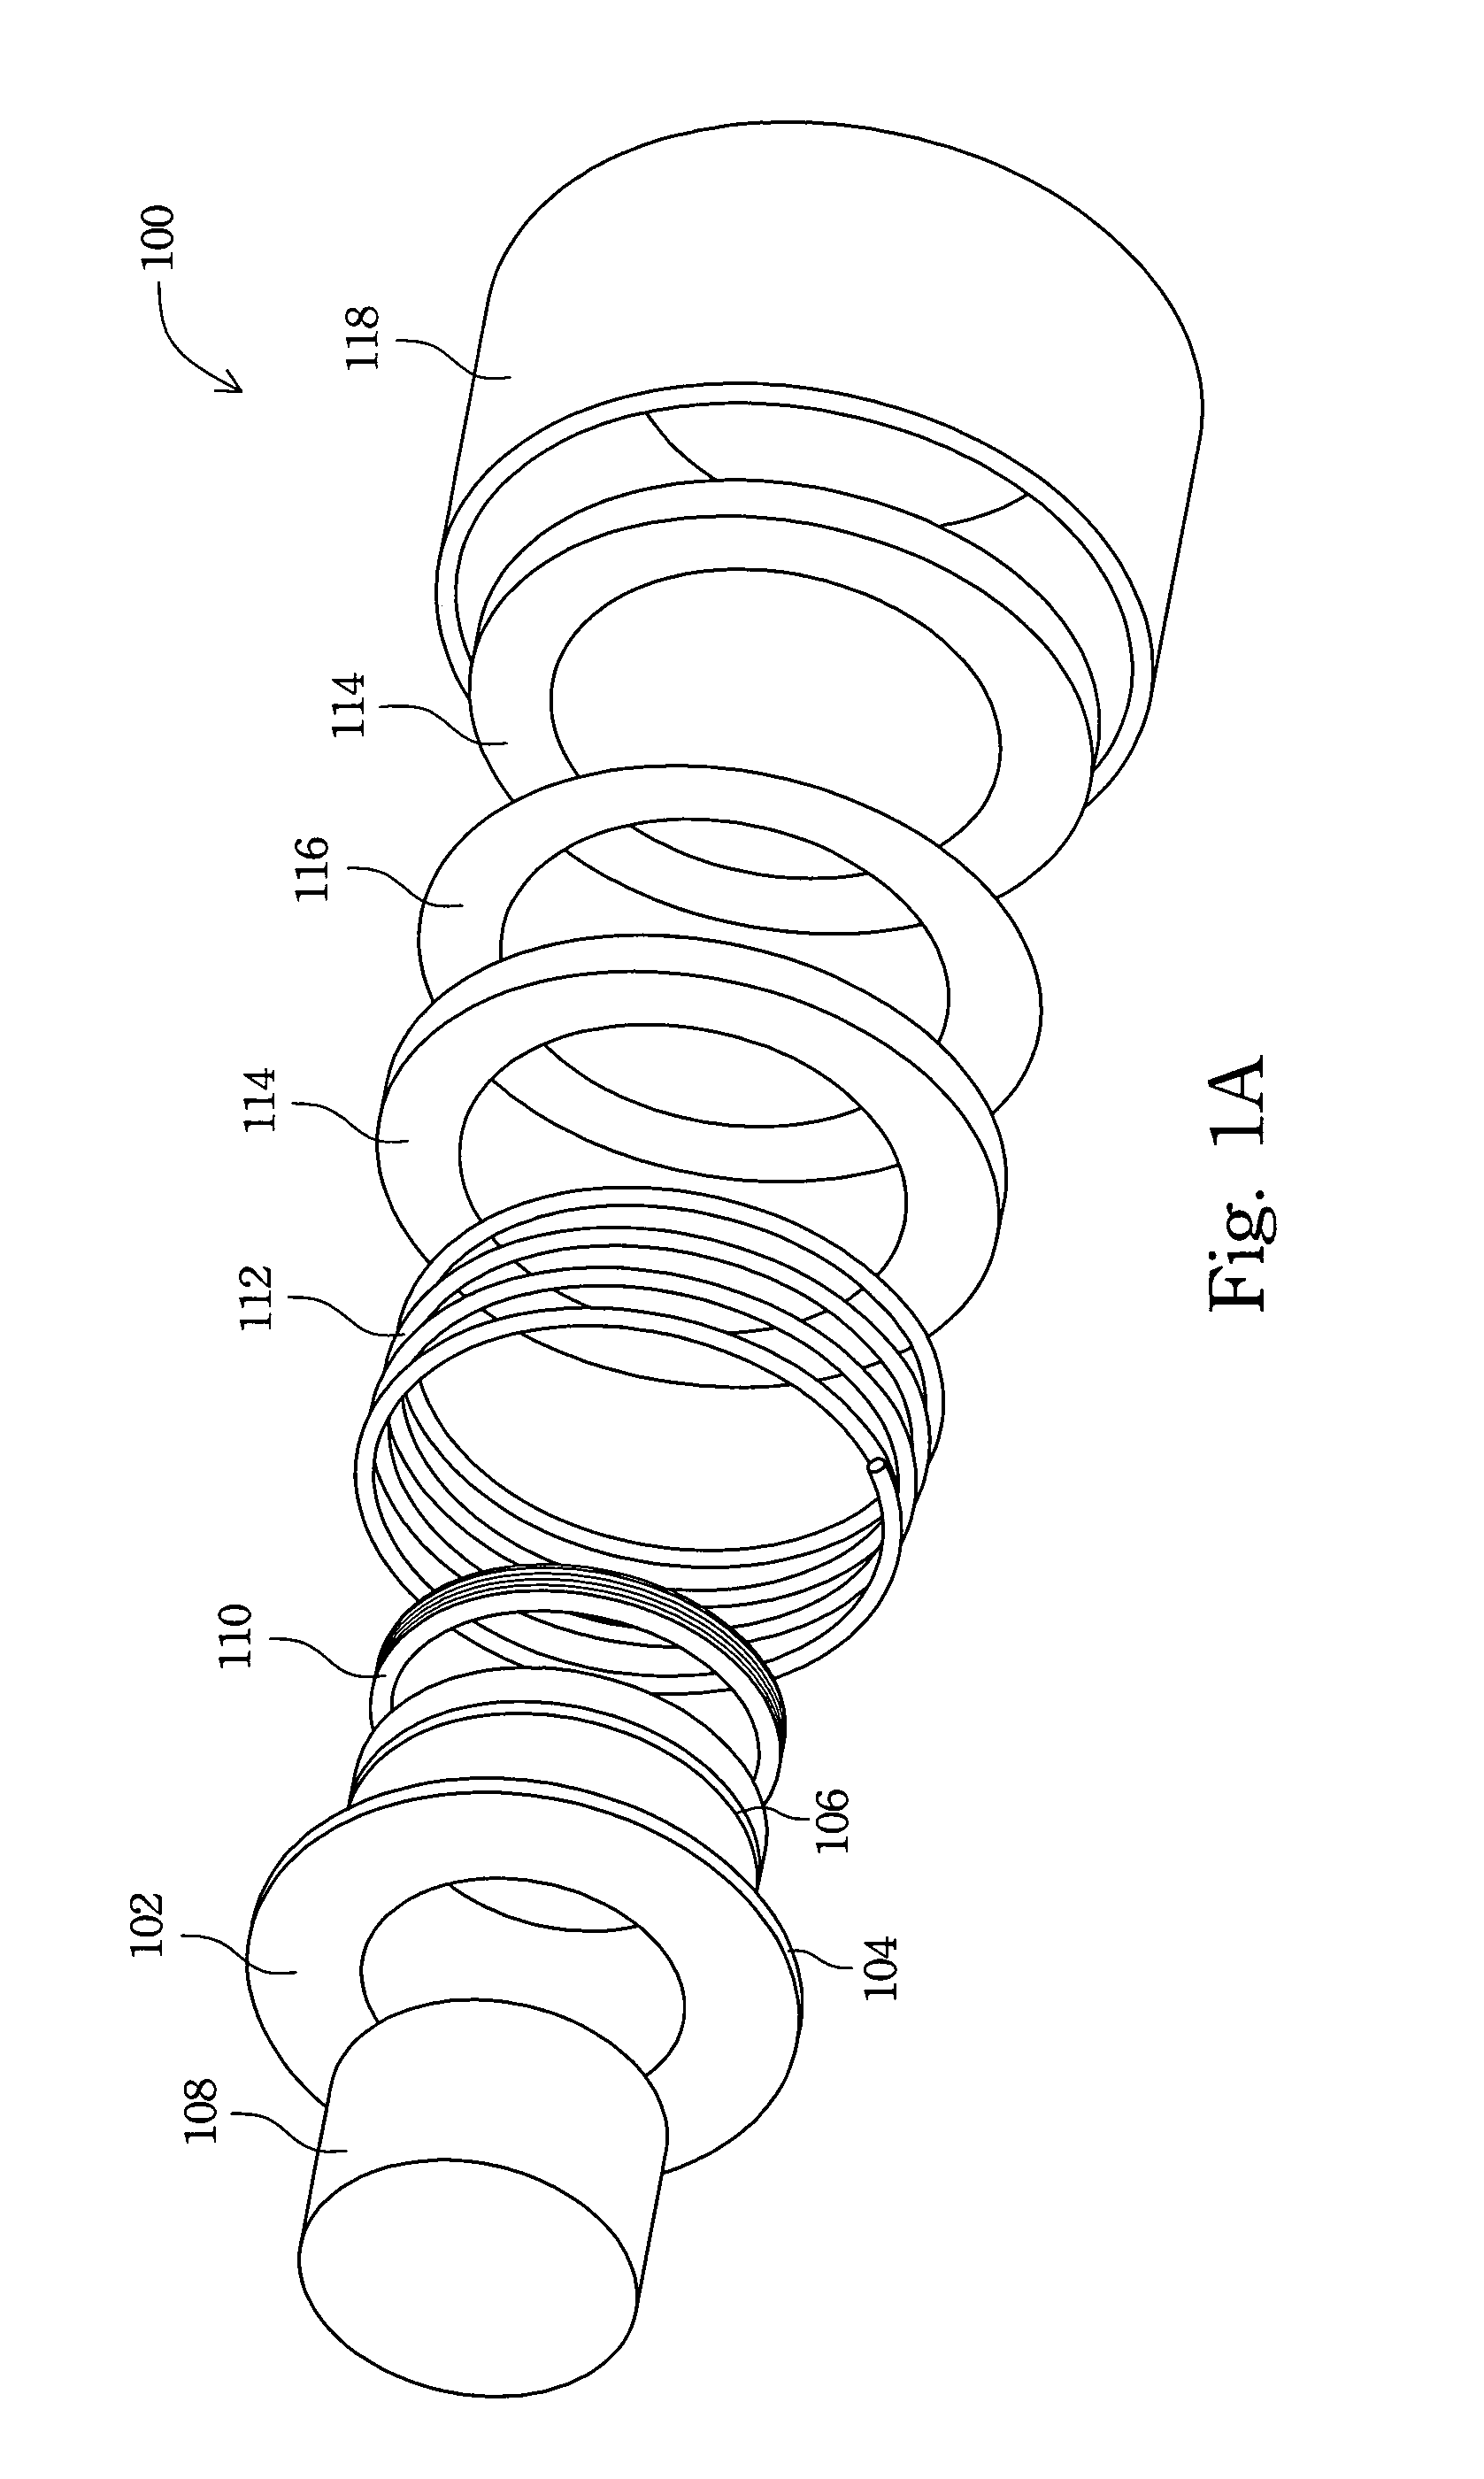 Driving mechanism for a camera lens